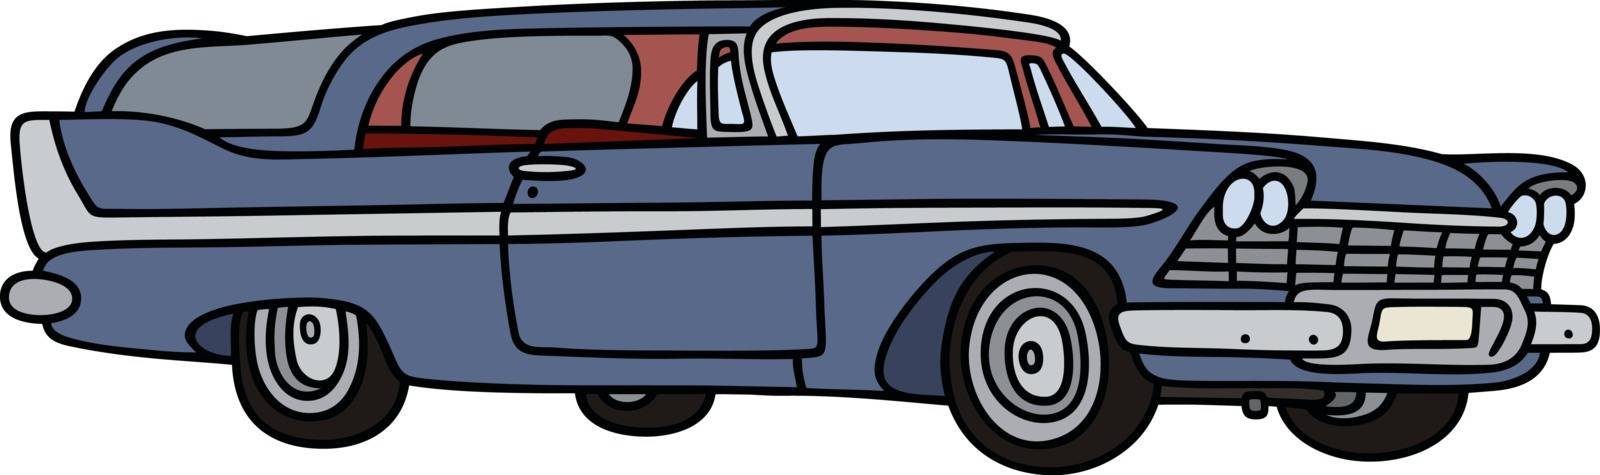 Hand drawing of a classic blue big american station wagon - not a real type